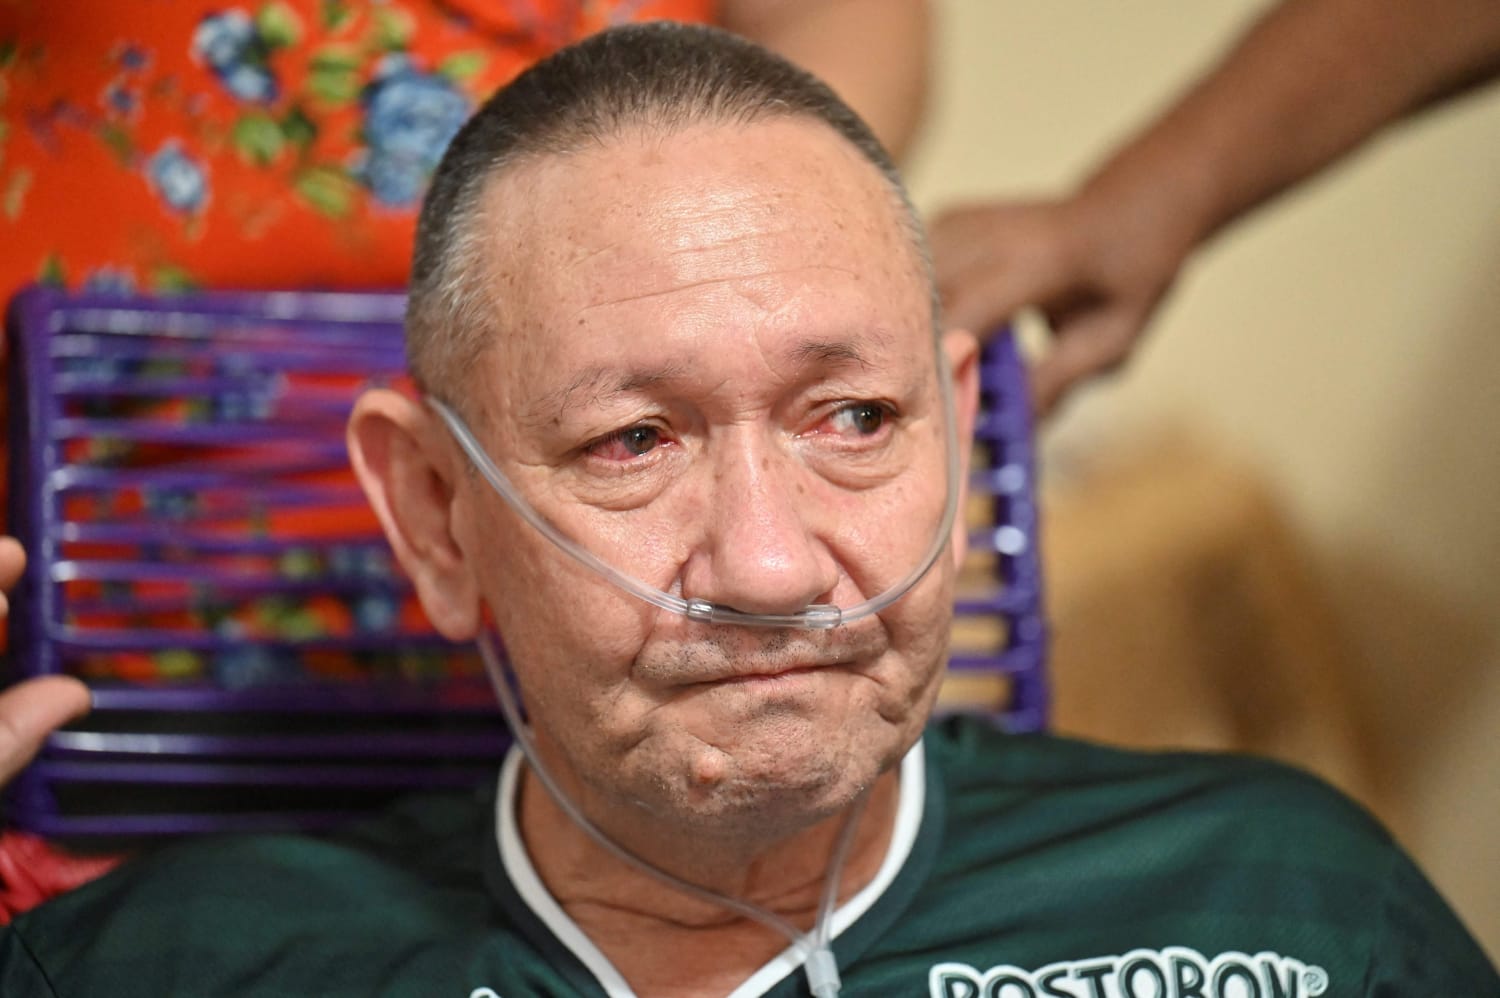 First Colombian with non-terminal illness dies legally by euthanasia